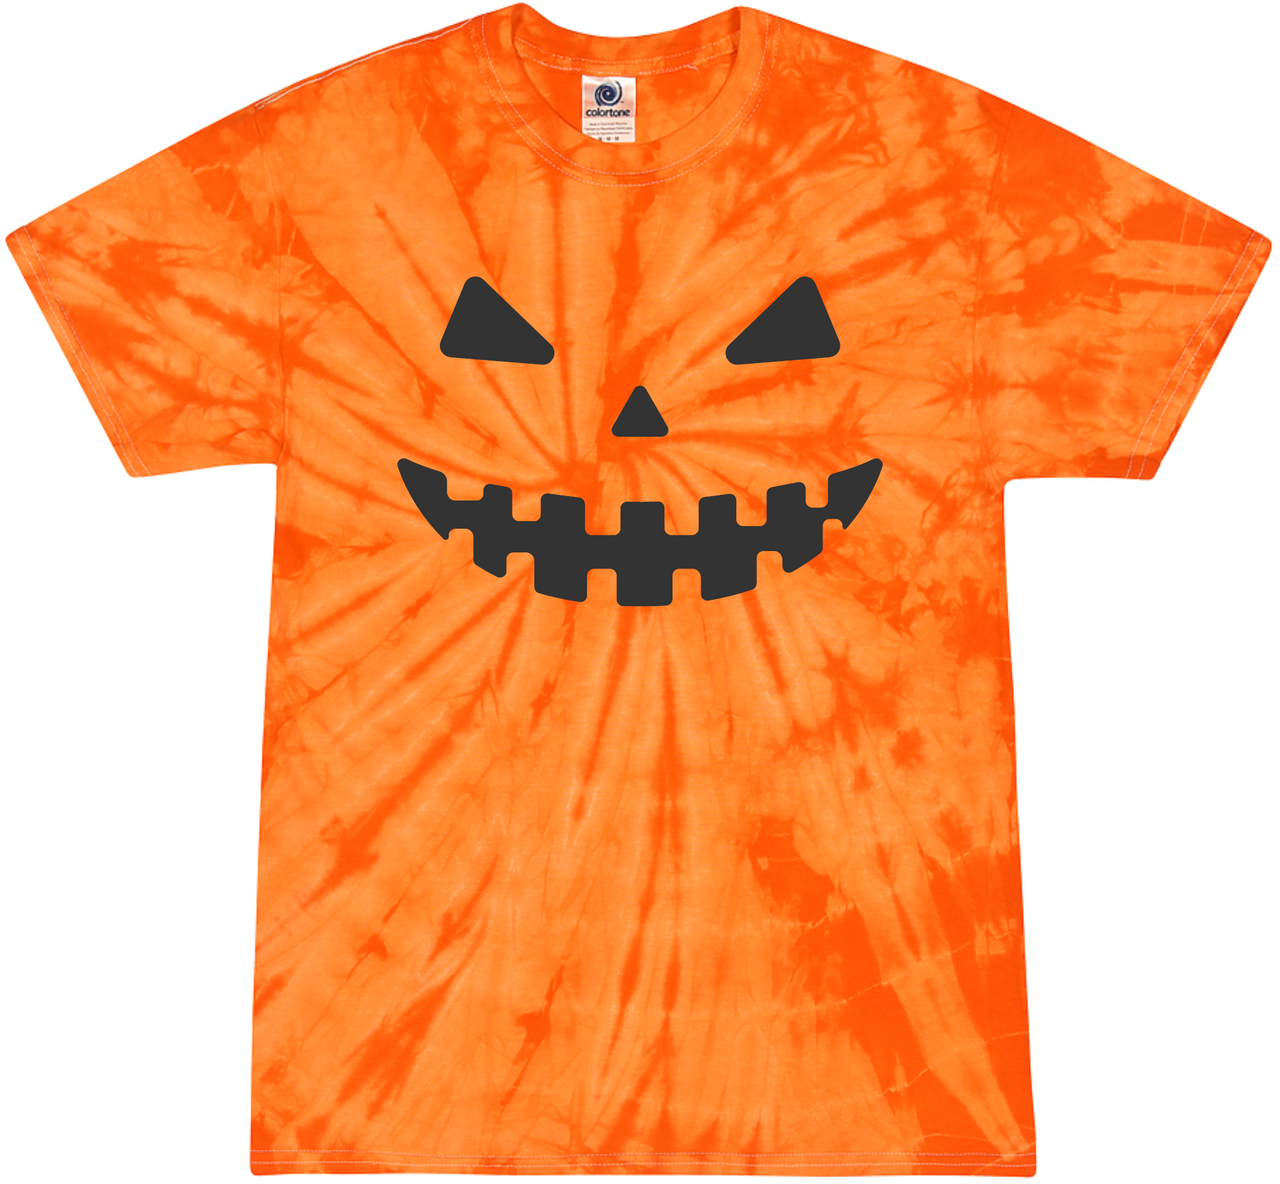 Youth Pumpkin Tie-dyed Tee Youth Shirt by Akron Pride Custom Tees | Akron Pride Custom Tees